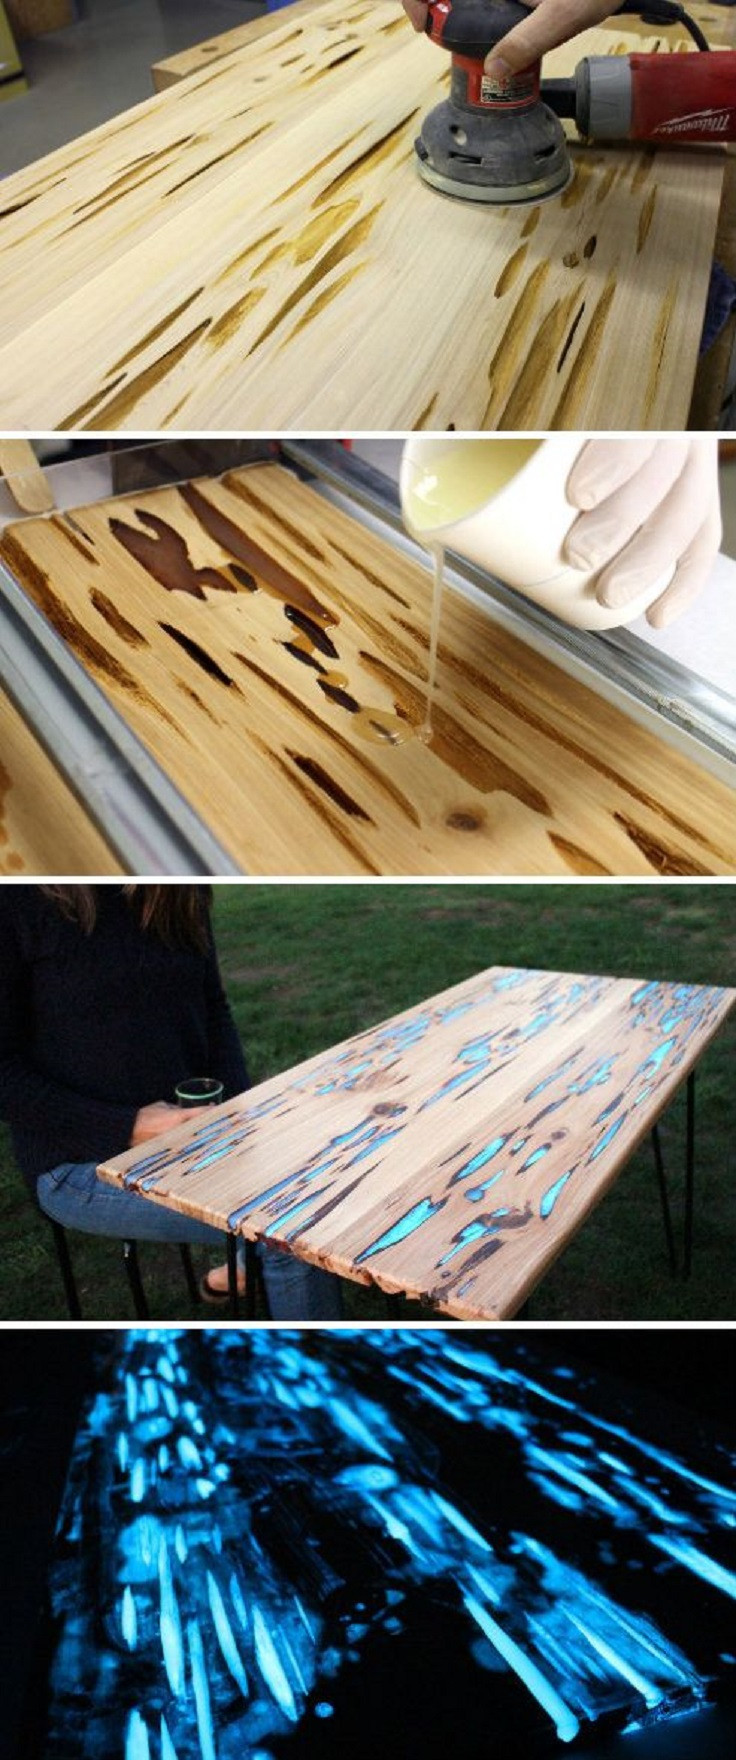 DIY Wood Projects For Kids
 Top 10 Creative DIY Woodwork Projects Top Inspired